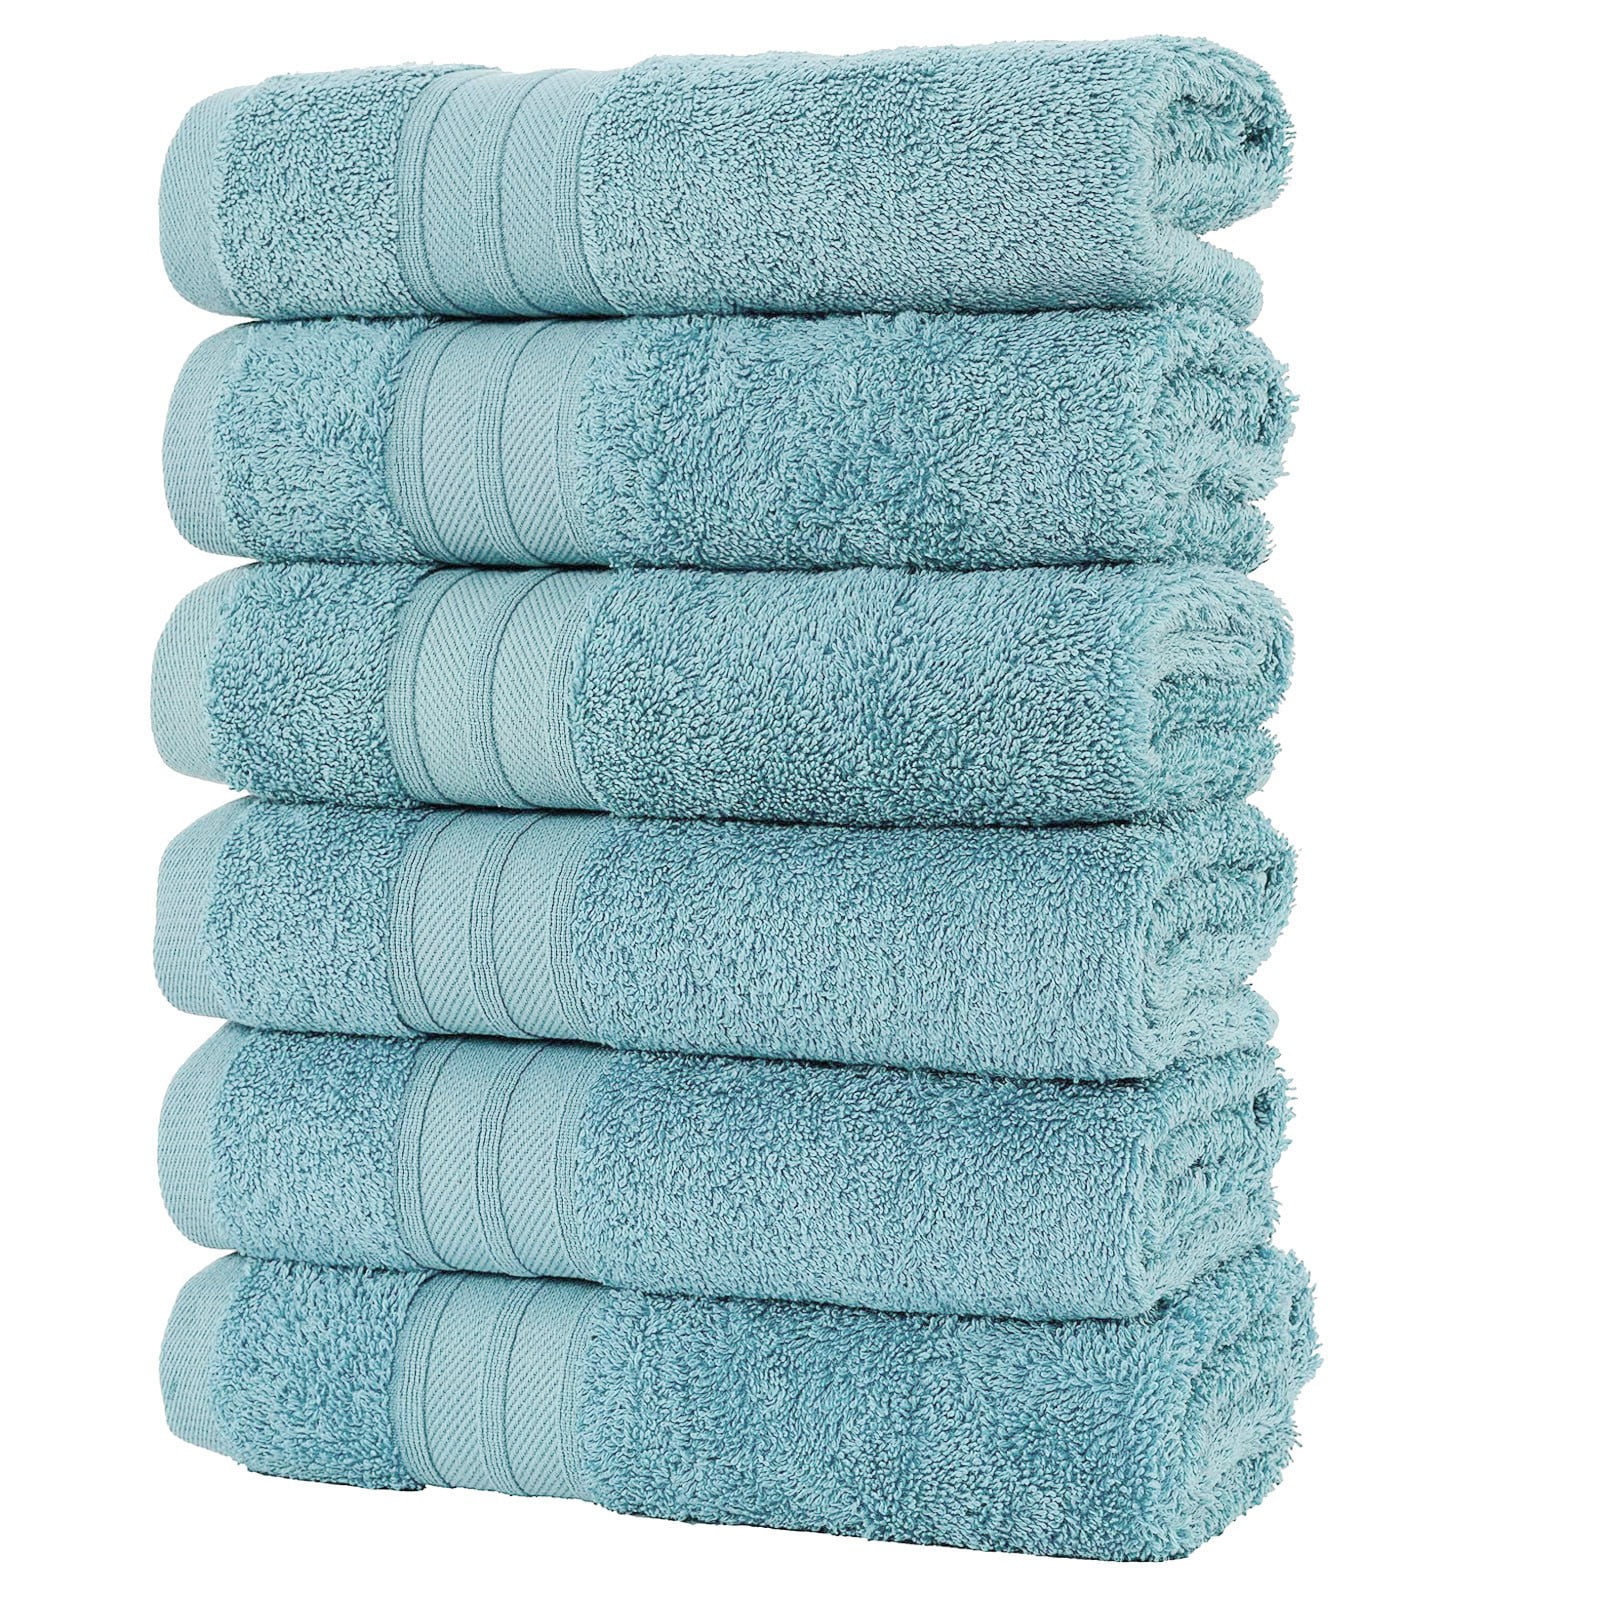 Details about   4 Pack Jumbo Bath Sheets Towels 100% Egyptian Cotton Super Soft Wow Bargain New 